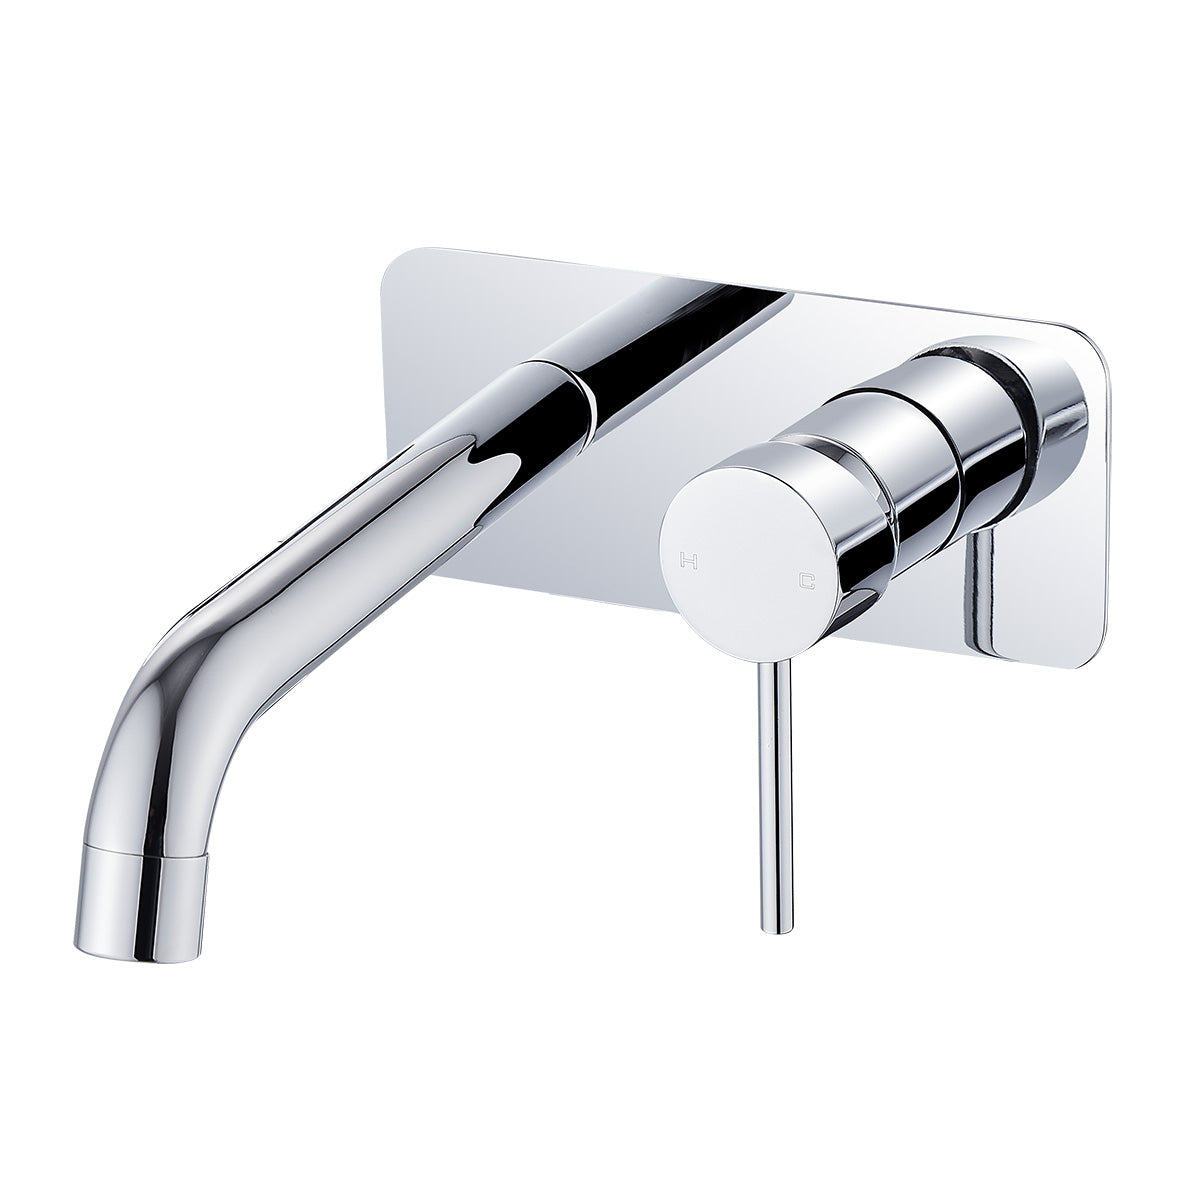 HELLYCAR IDEAL WALL MIXER WITH OUTLET 209MM CHROME